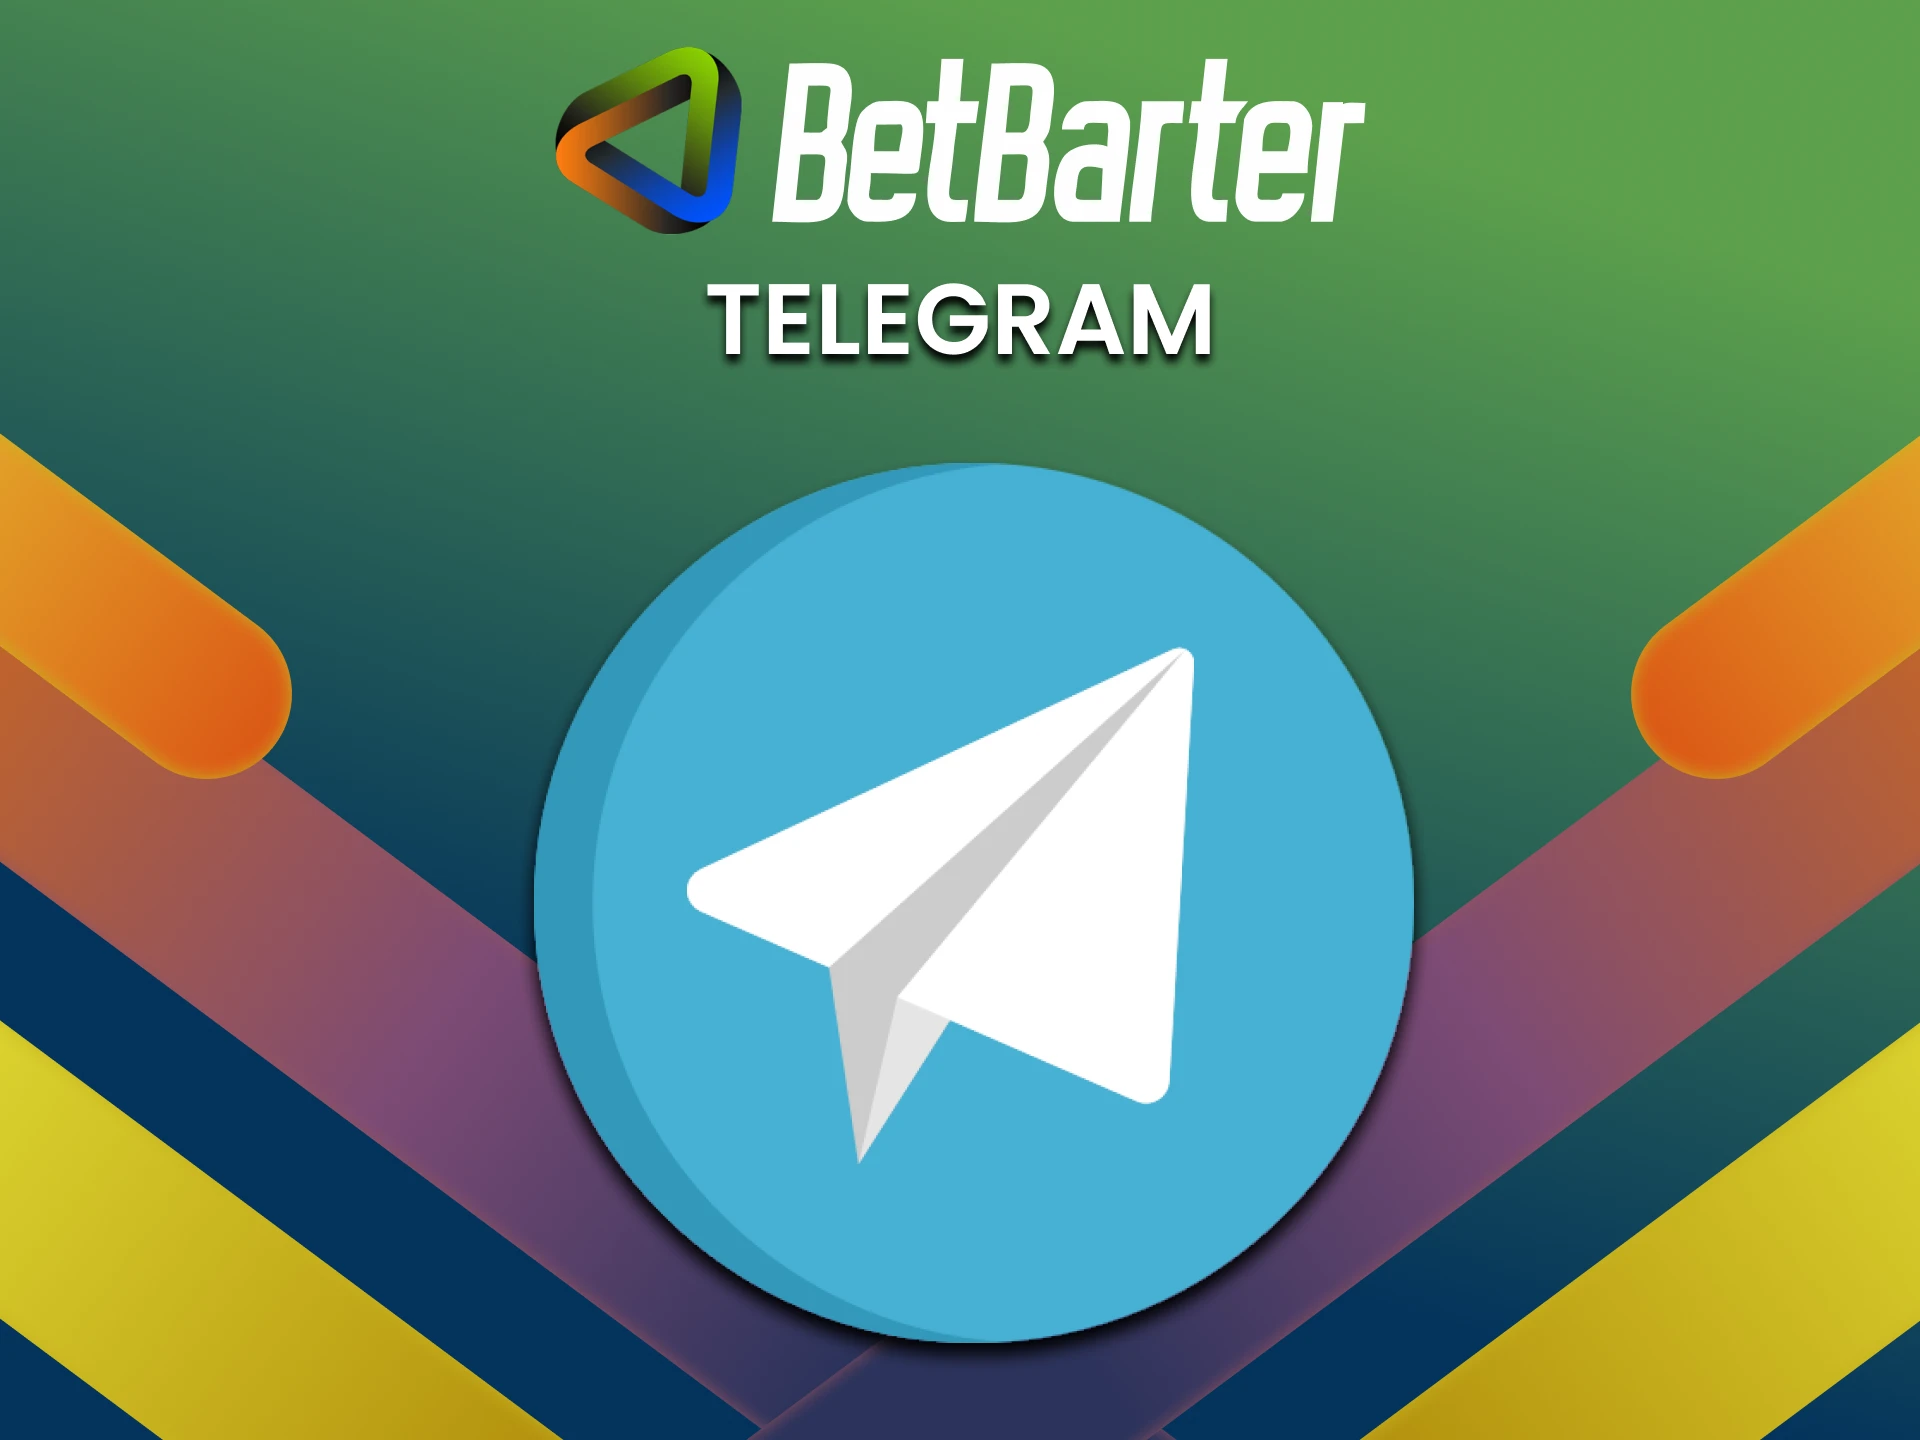 You can contact the BetBarter support team via telegram.